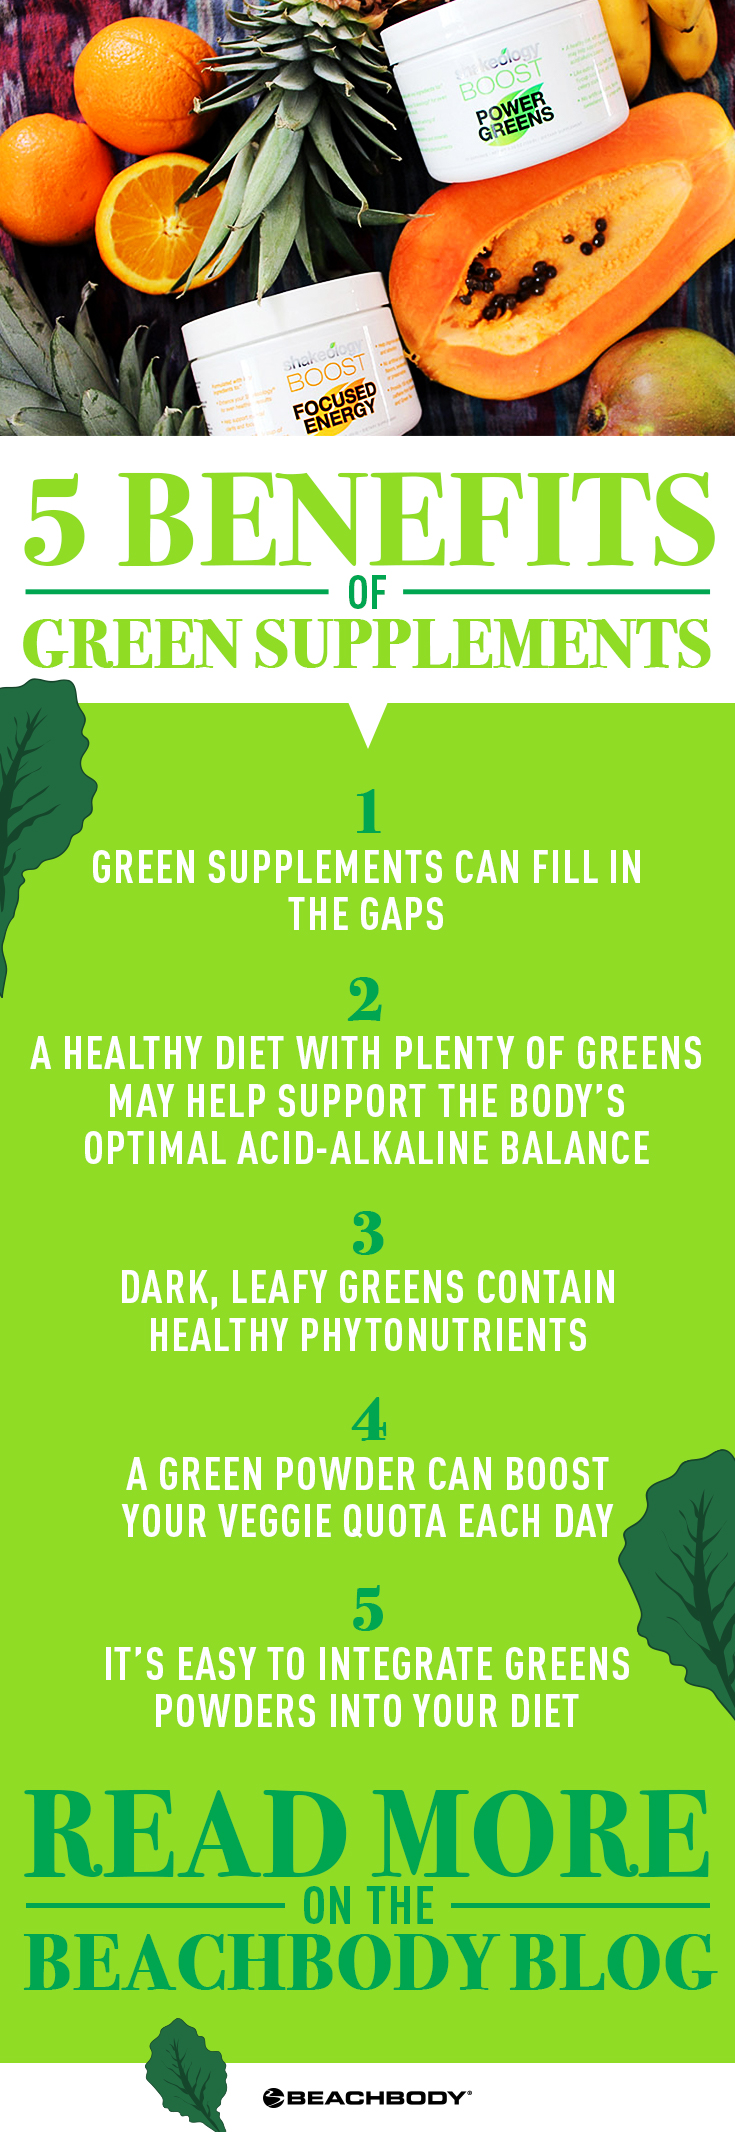 The Ultimate Guide To Shakeology Boost: Power Greens (Pdf)